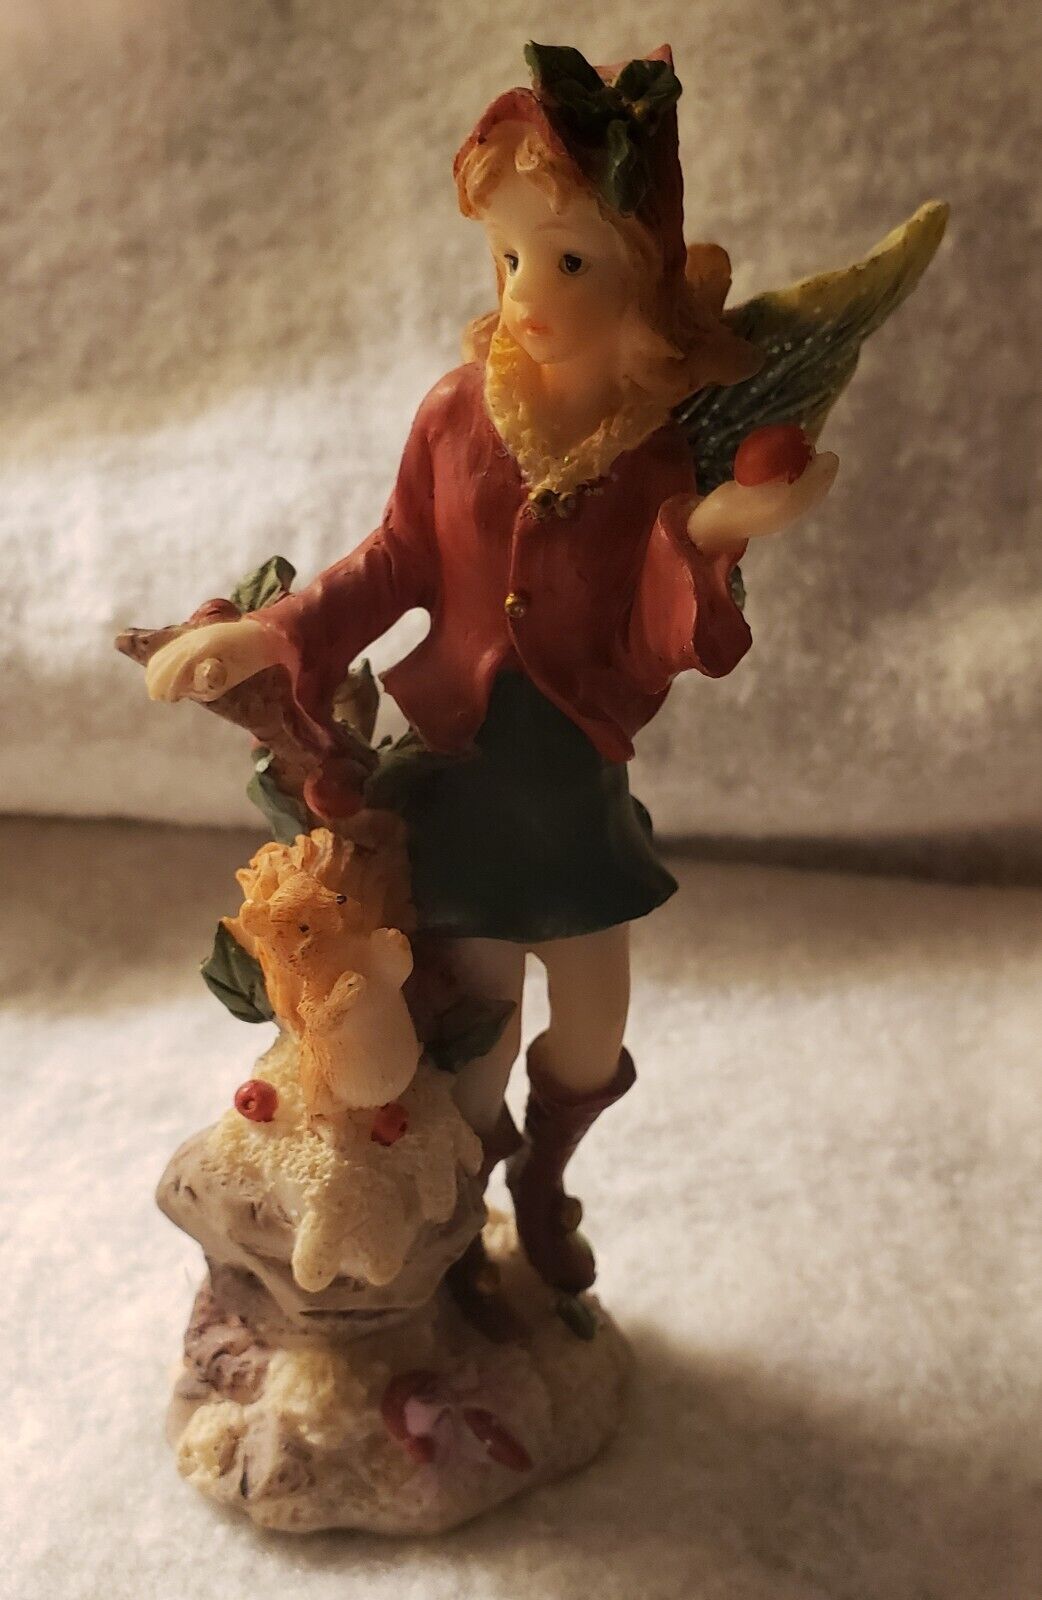 Beautiful Winter Fairy Figurine for the Christmas Holiday